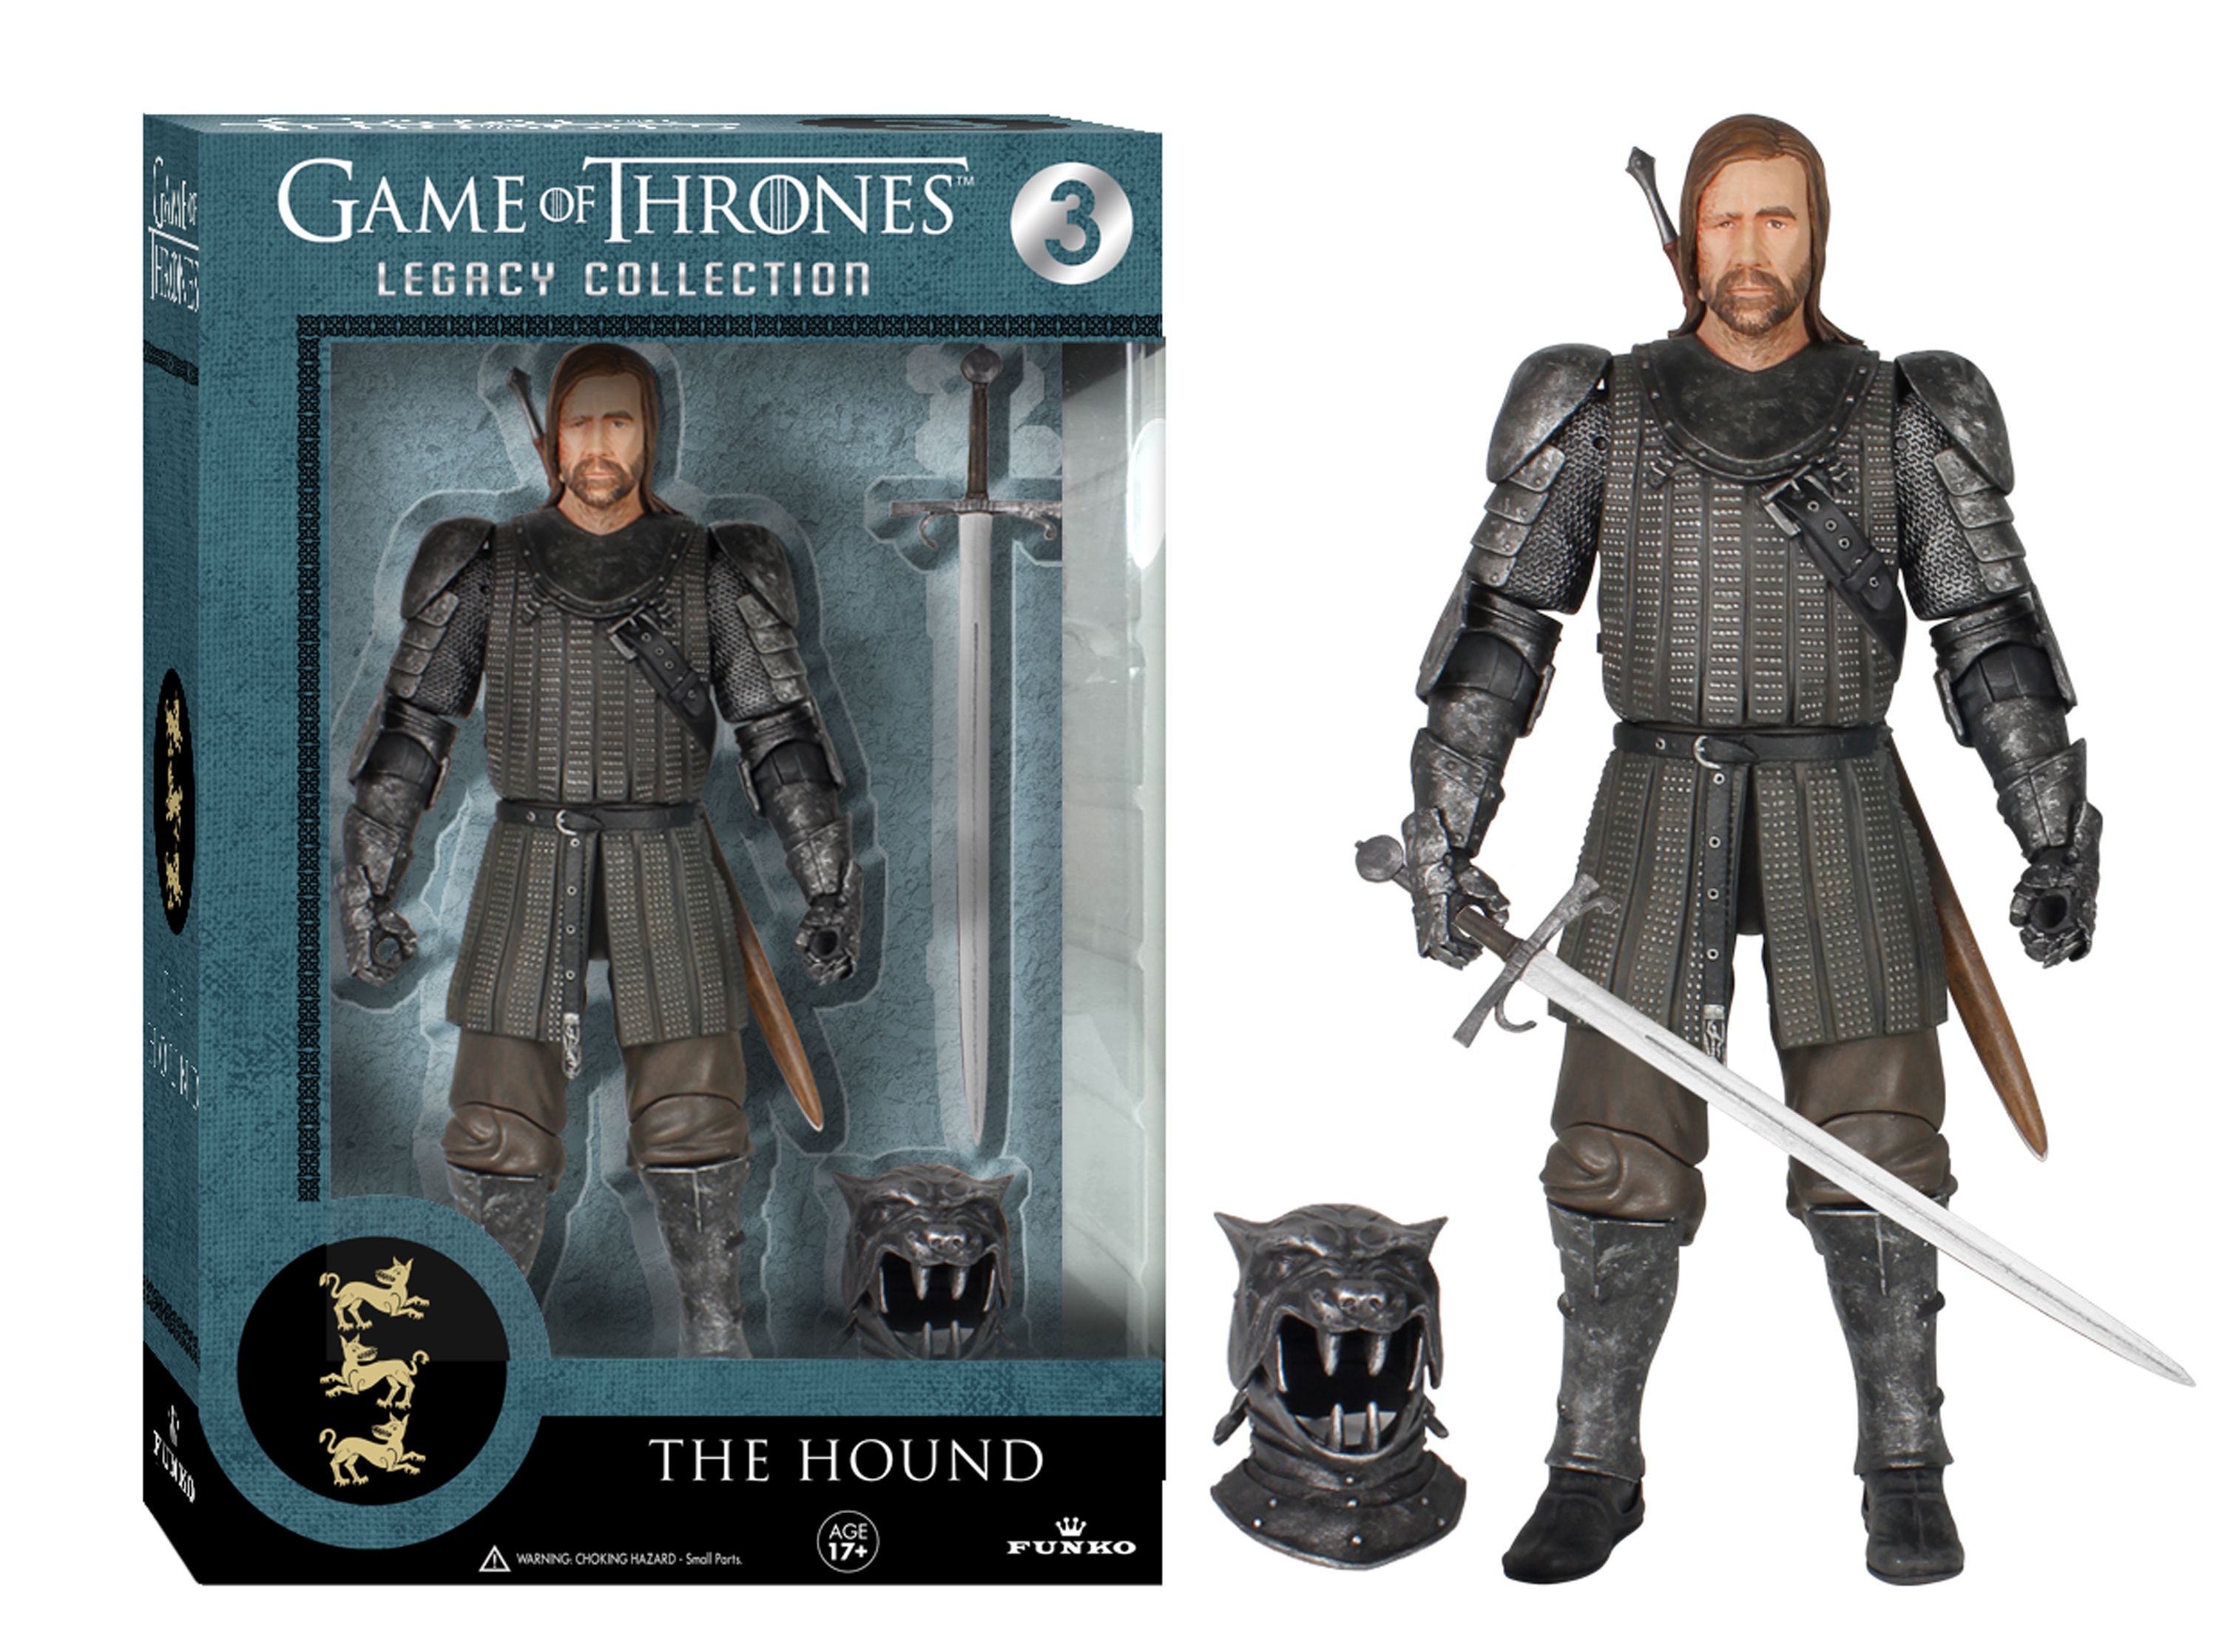 The Hound action figure